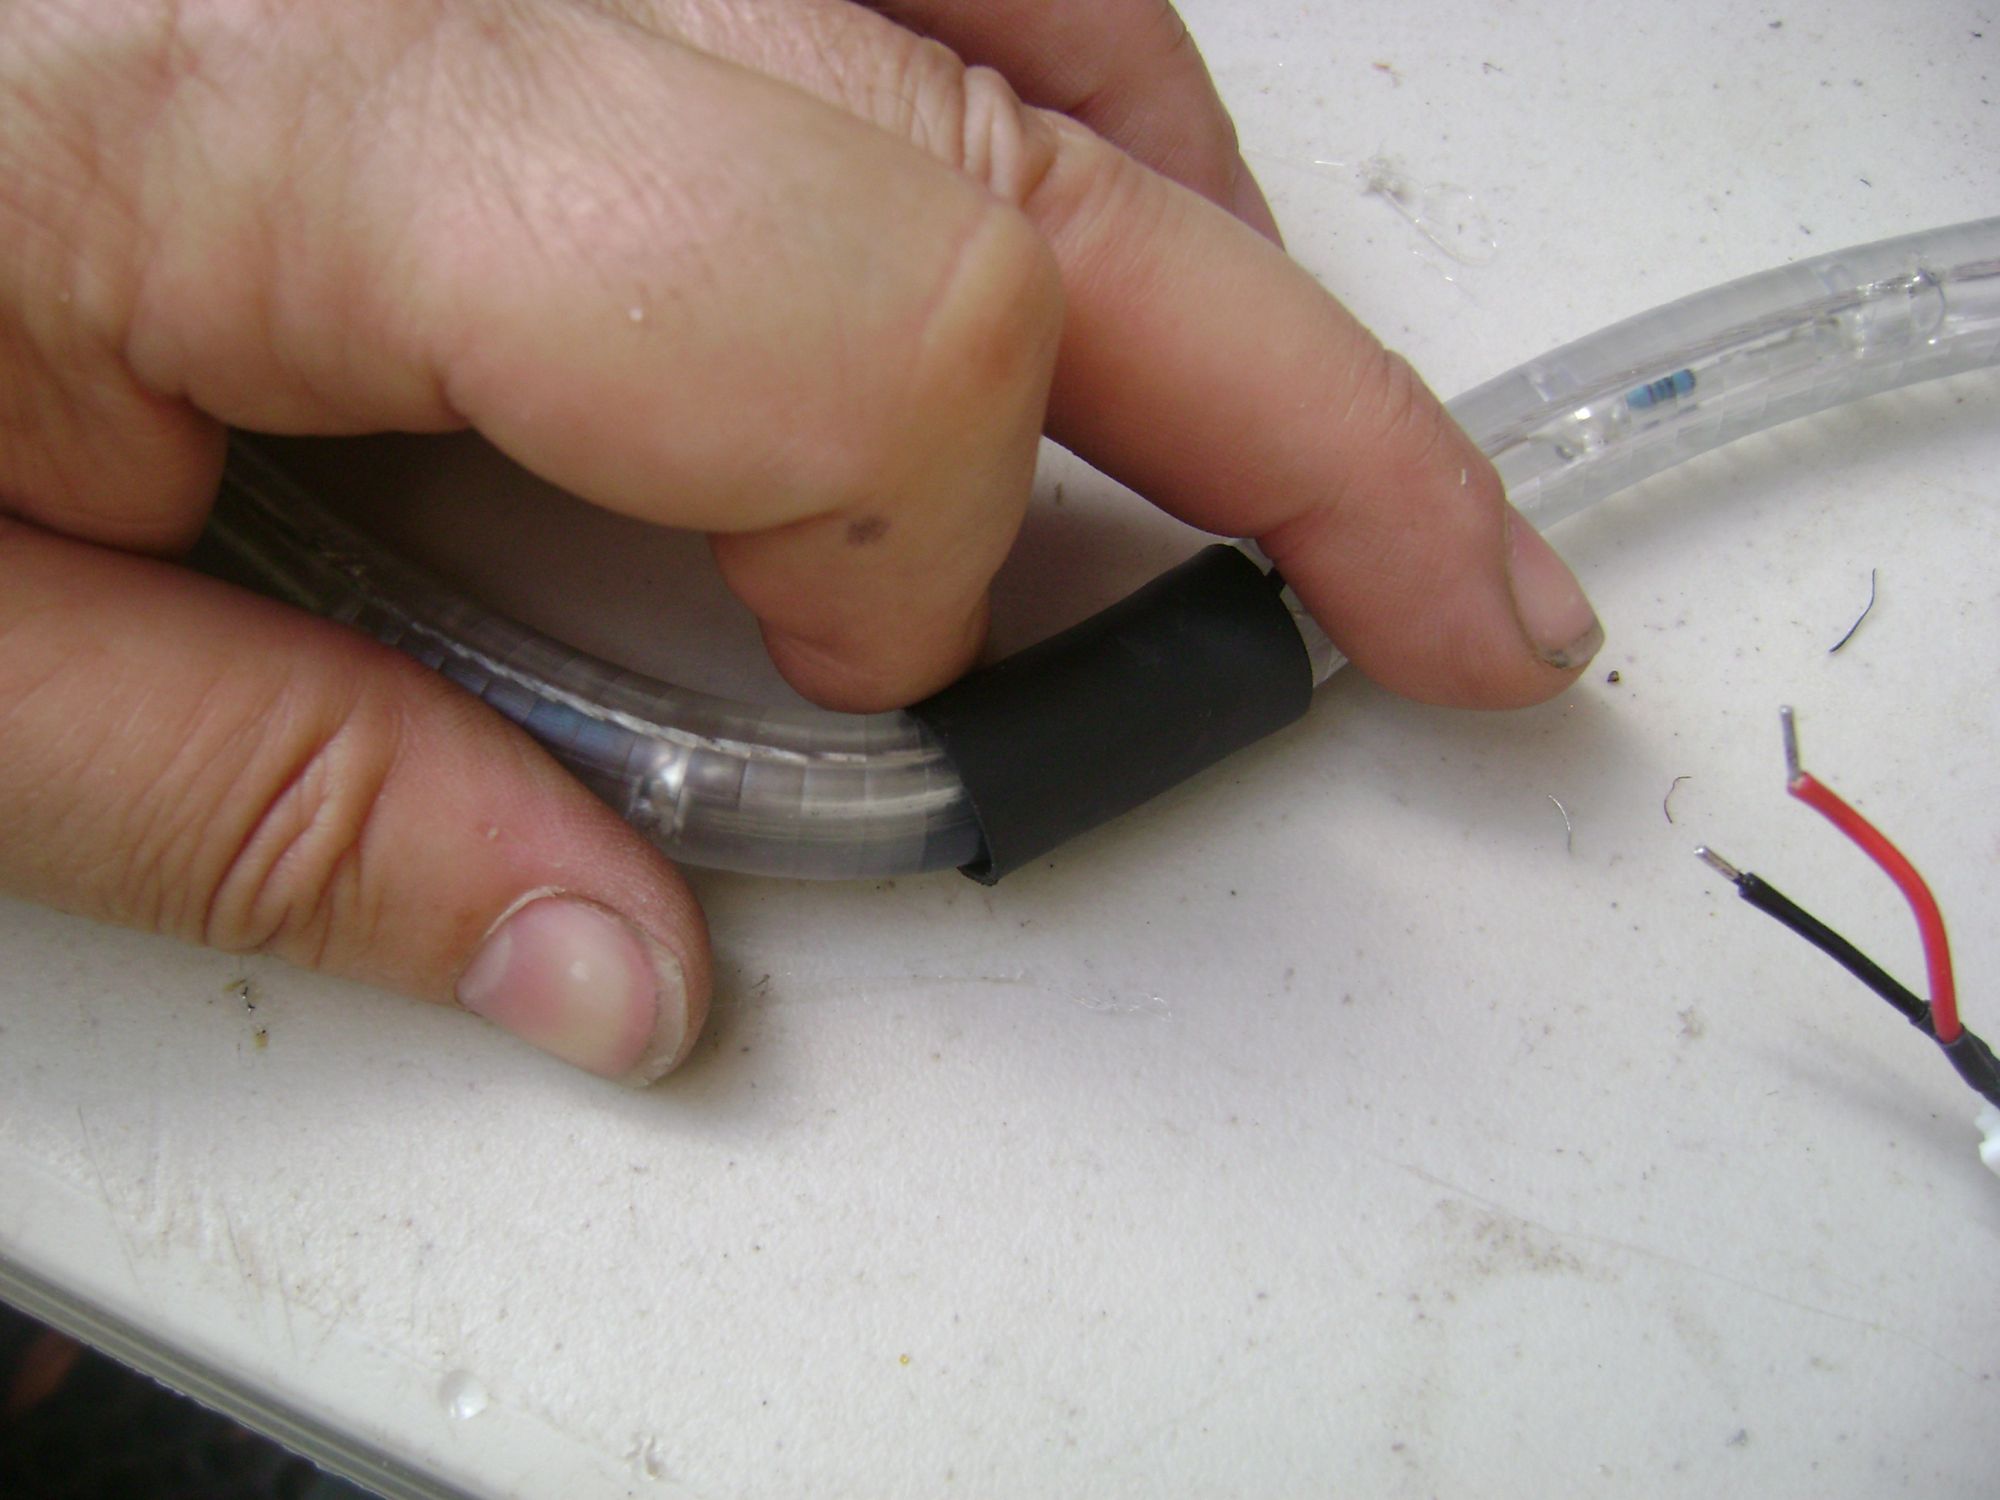 Positioning the Heat Shrink Tubing